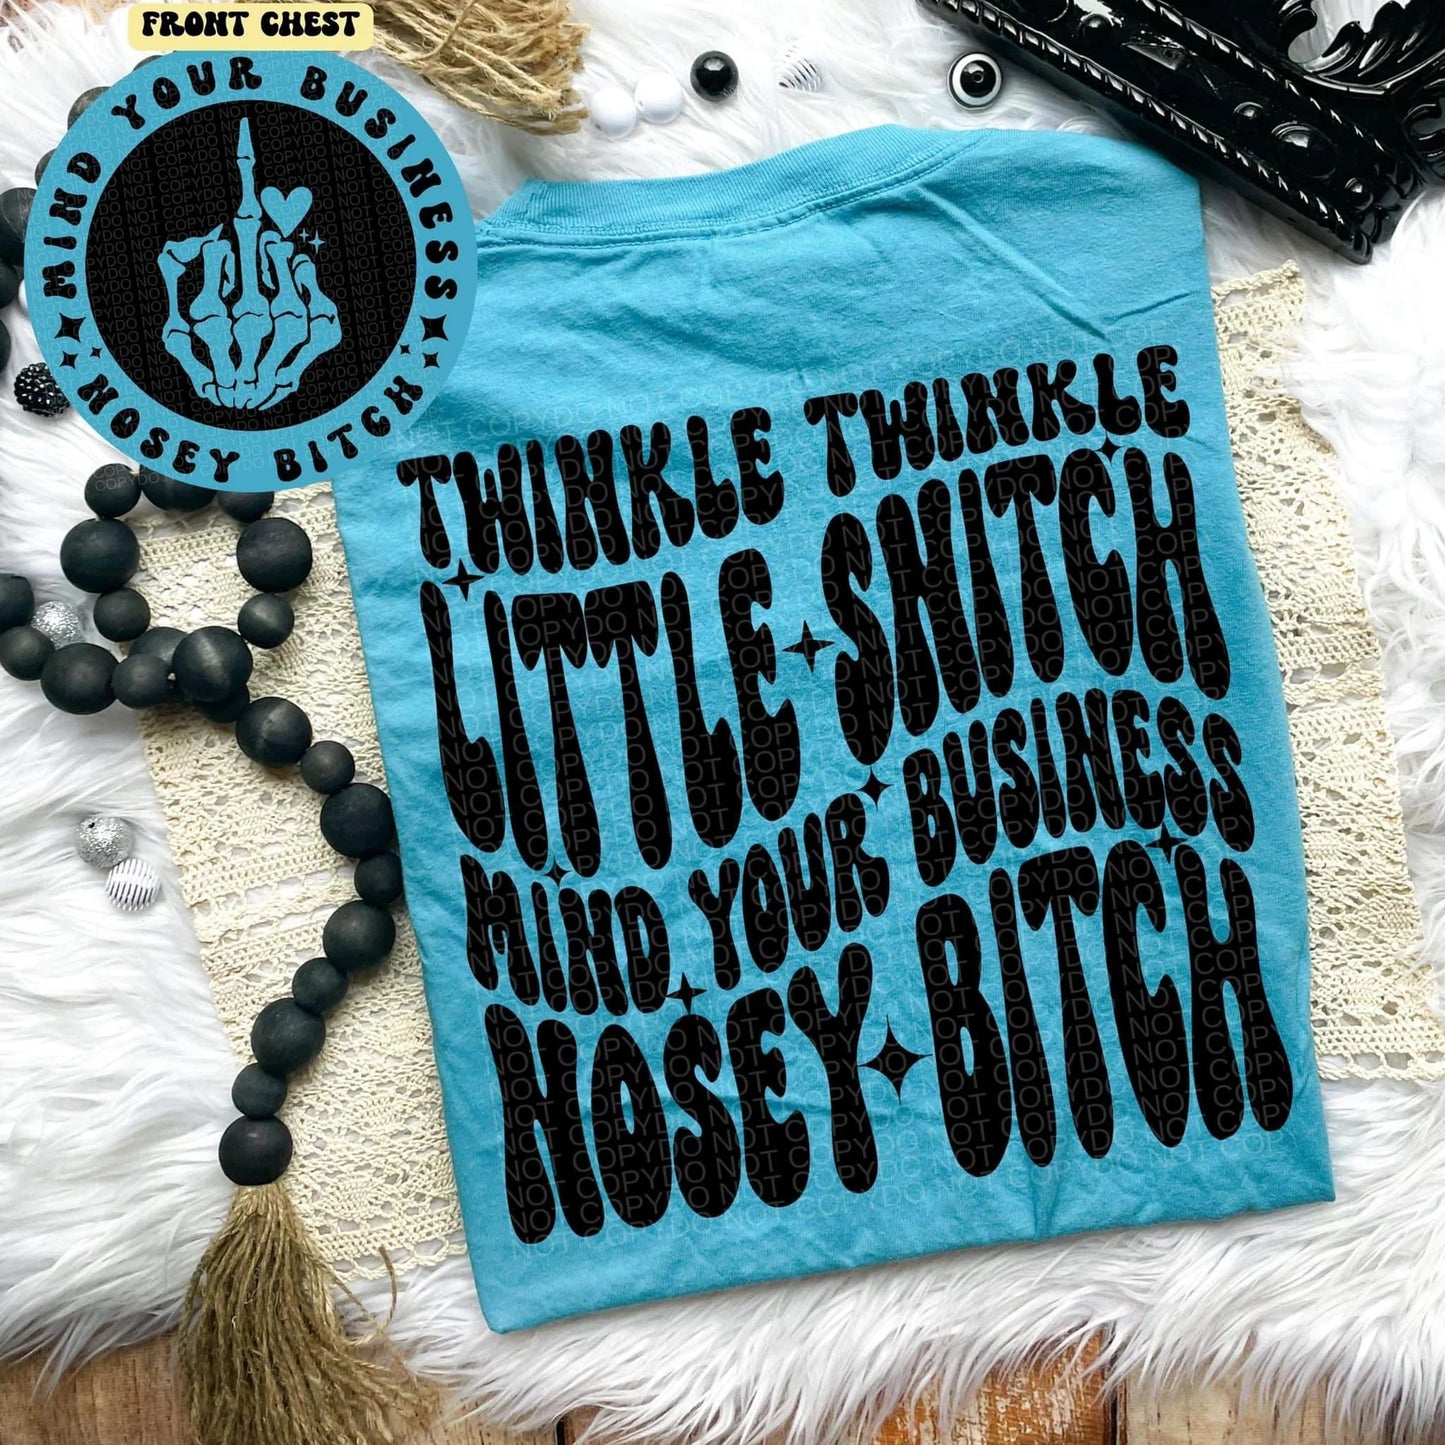 Twinkle twinkle little snitch *Ollie & Co. Exclusive*